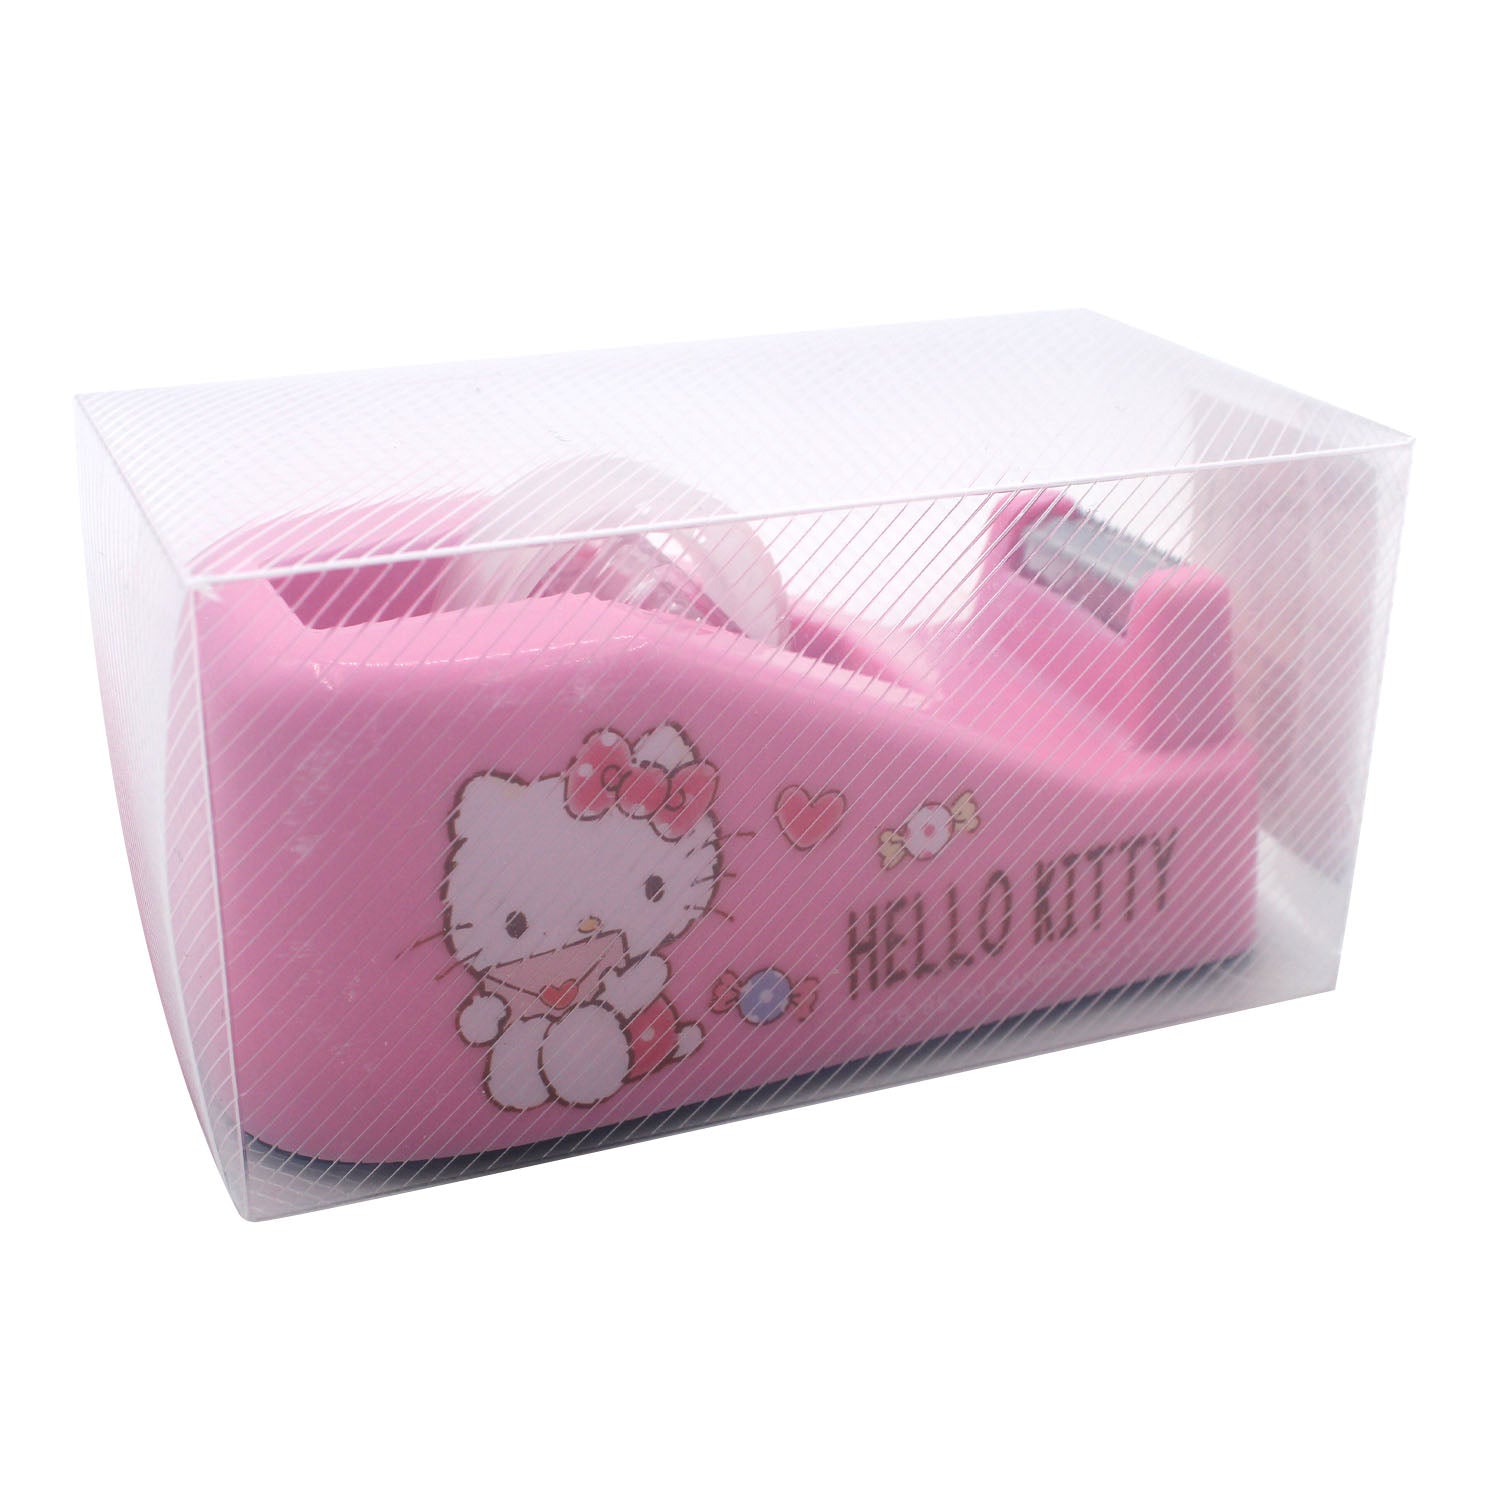 Sanrio Mini Masking Tape With Masking Tape Cutter and Case [Sanrio